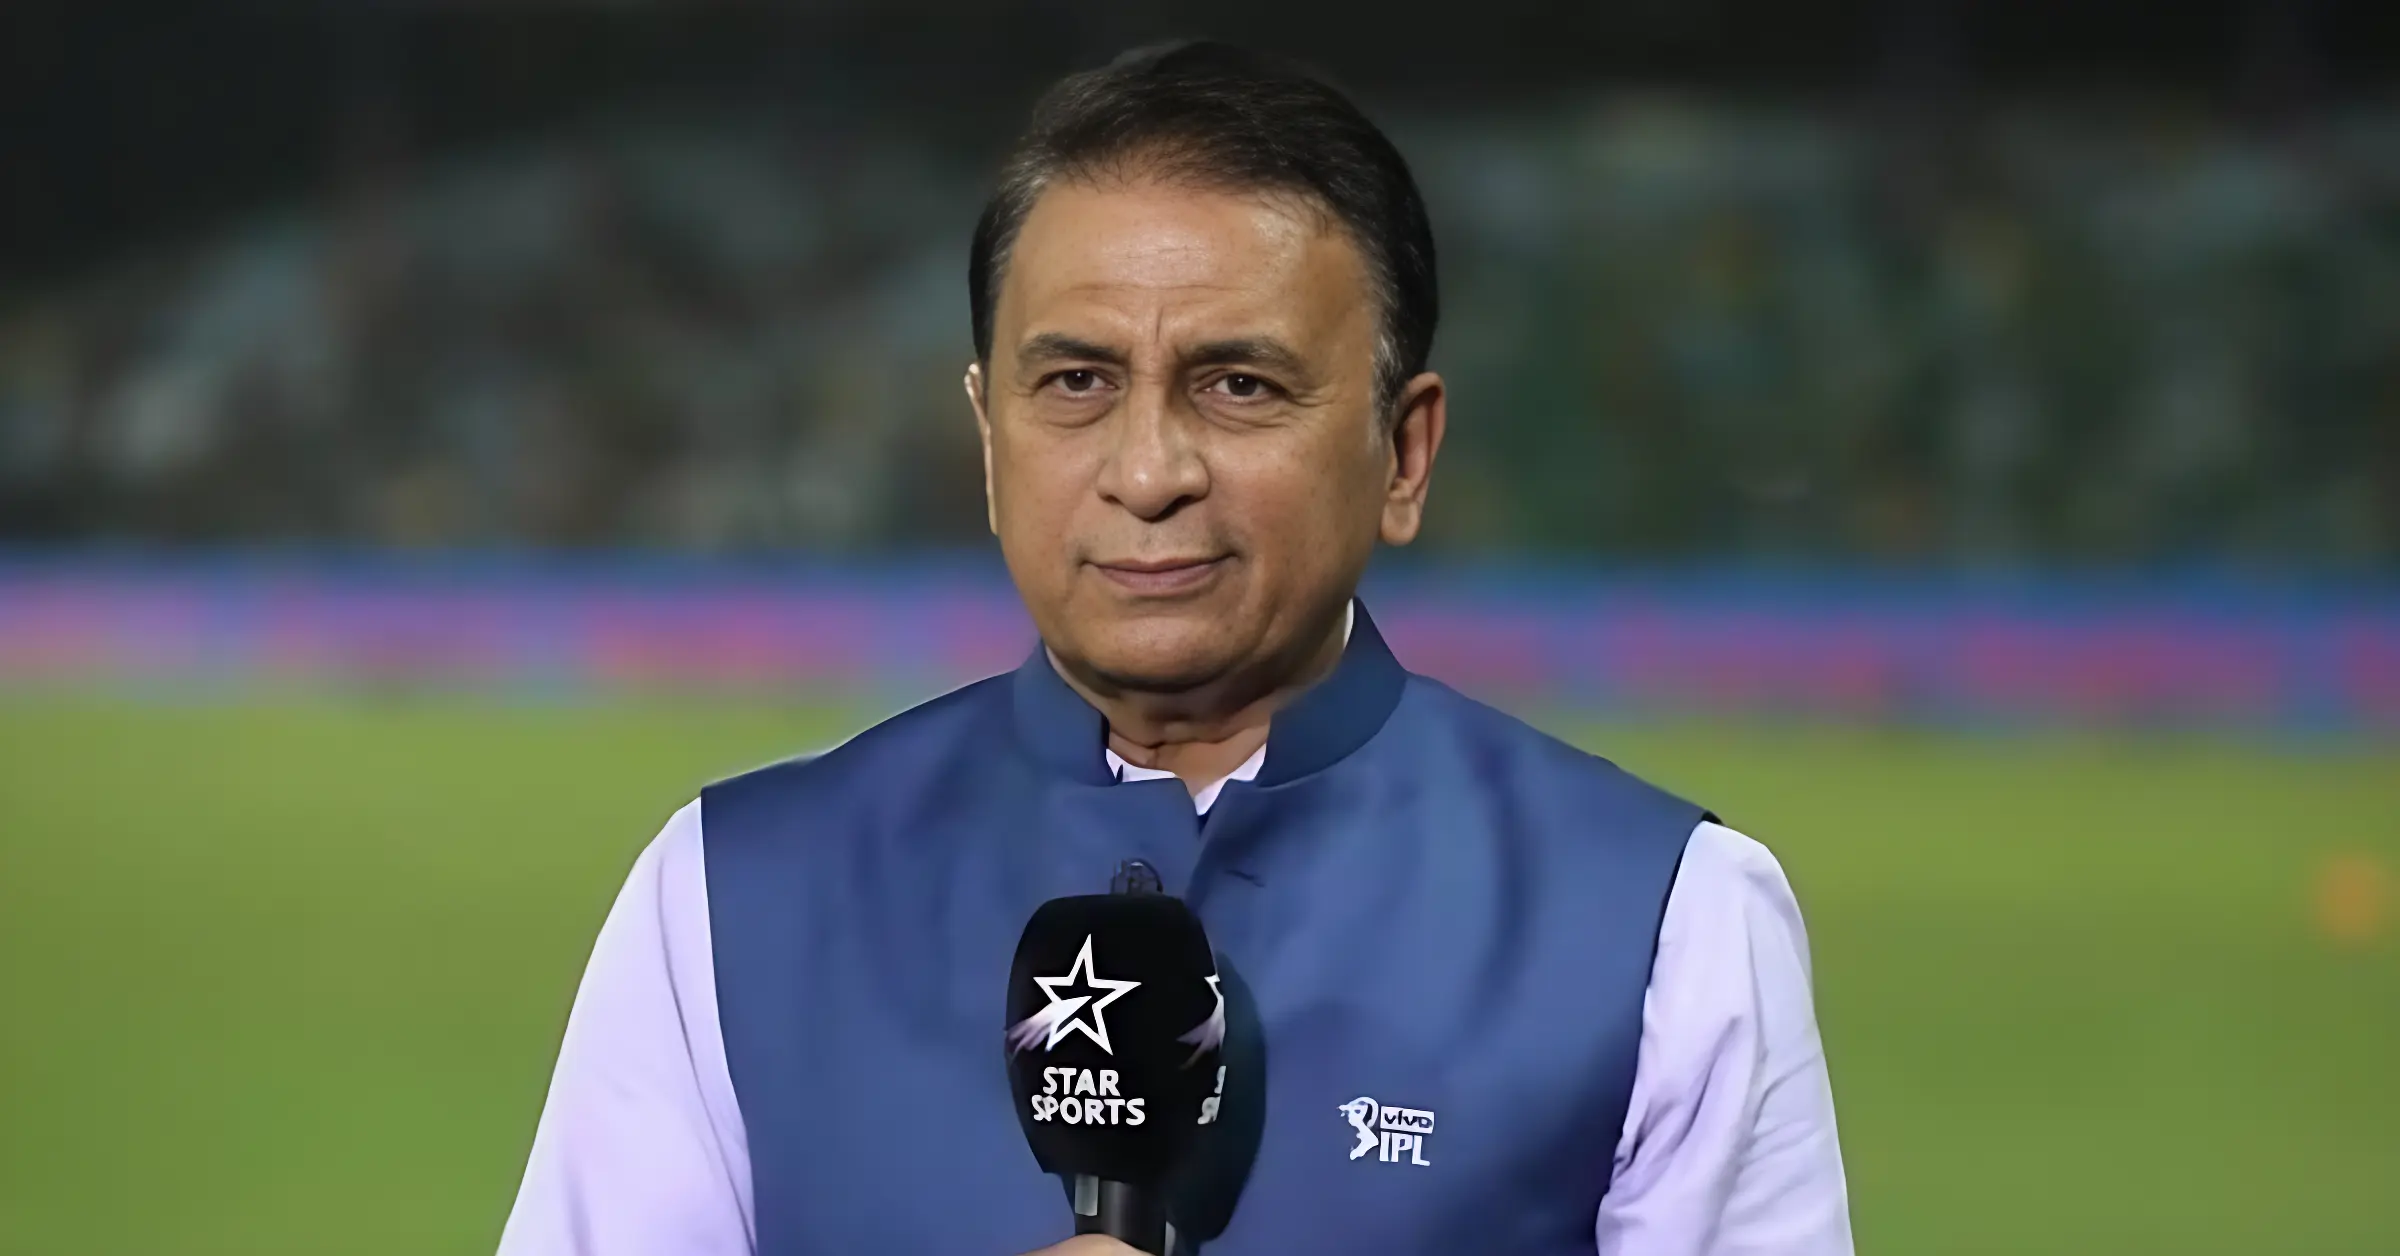 Why the Mumbai Indians benched Rohit Sharma in favour of Hardik Pandya is explained by Sunil Gavaskar - INFORMEIA